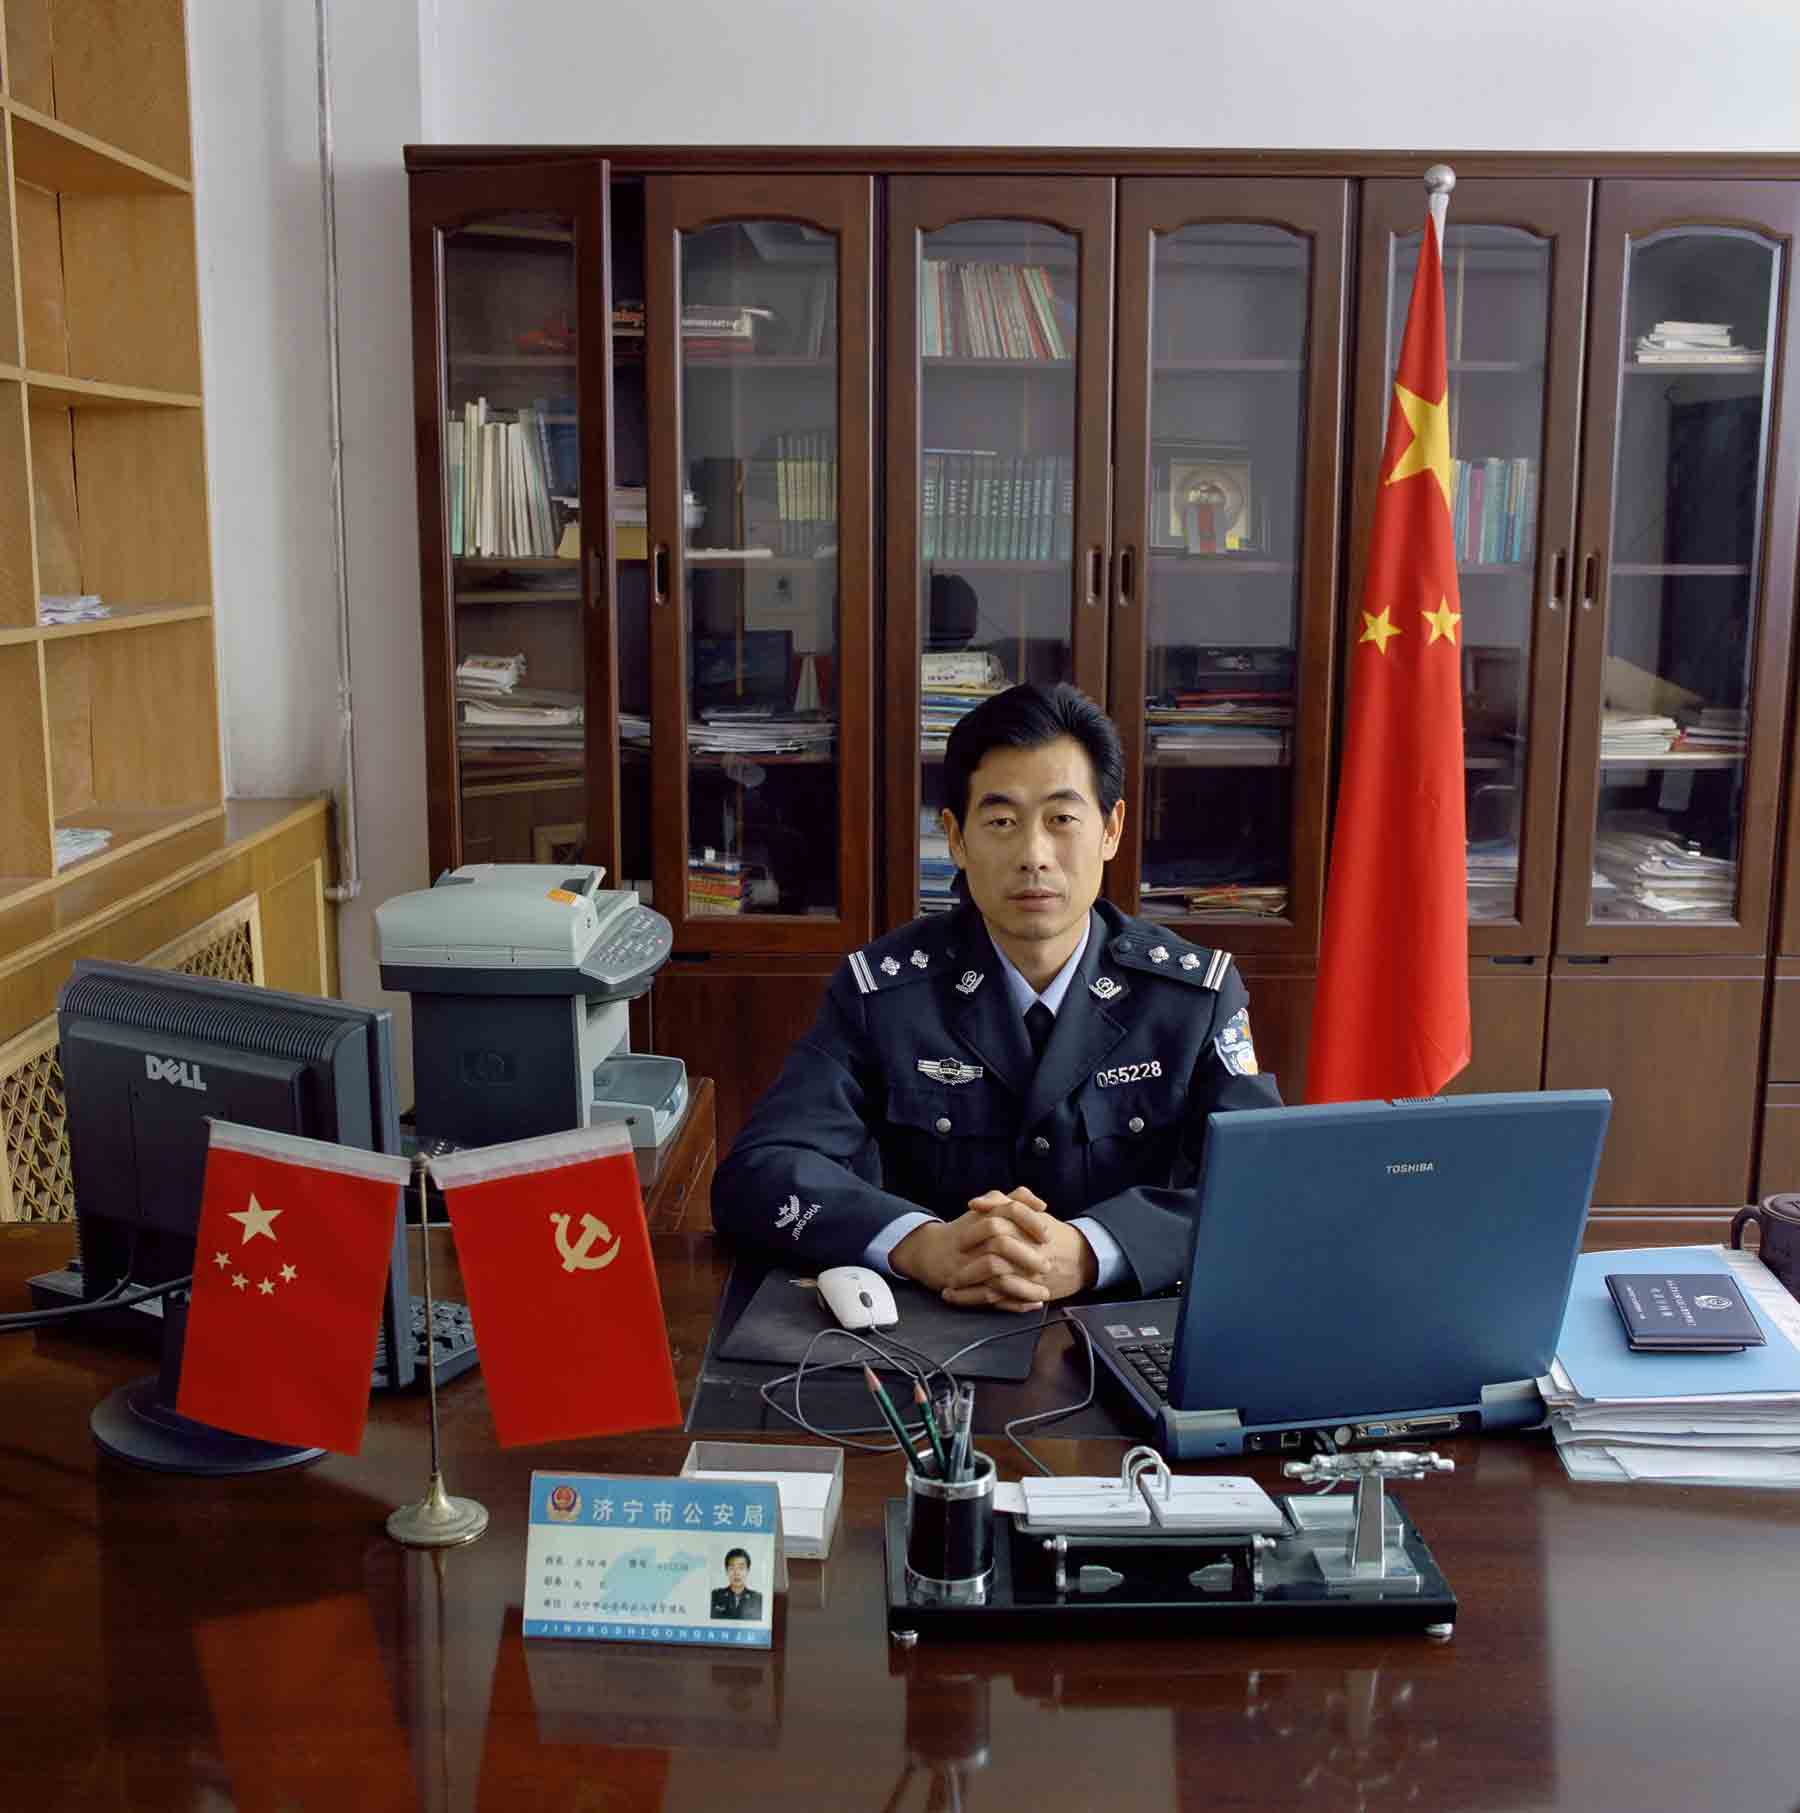 China-06/2007 [Jin., QSF (b. 1964)]
Qu Shao Feng (b. 1964) is chief general of Jining Public Security Bureau Division of Aliens and Exit-Entry Administration in Jining City, Shandong province. Monthly salary: 3,100 renminbi ($ 384, 286 euro).